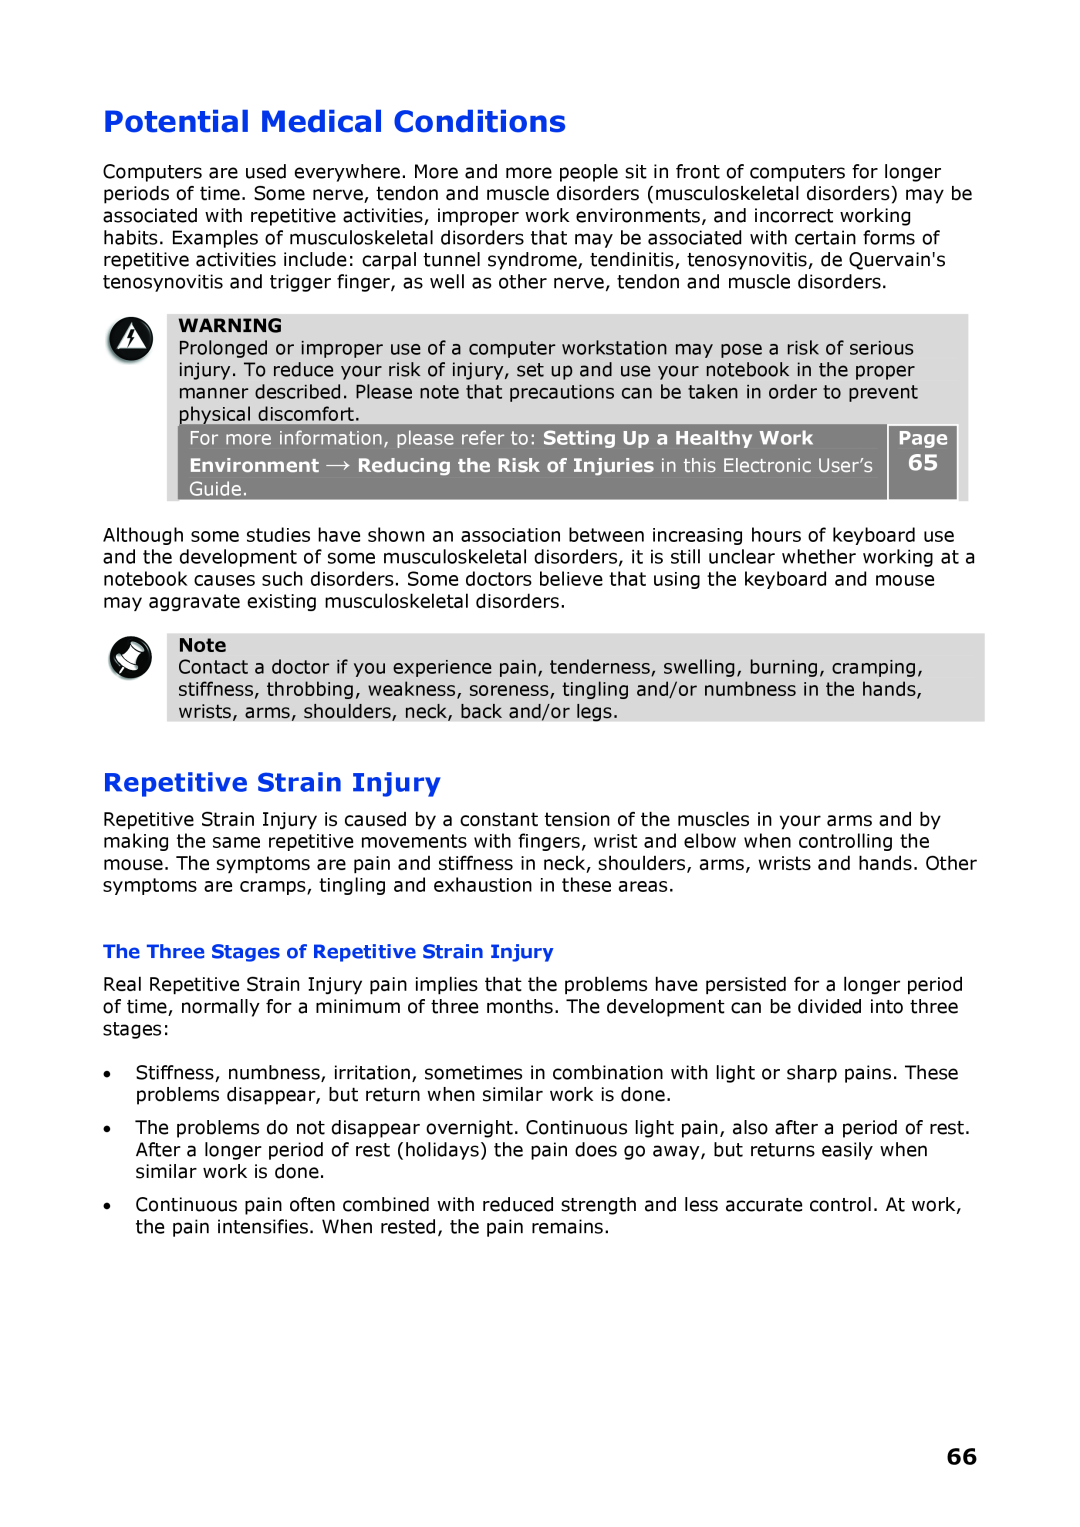 NEC P8510 manual Potential Medical Conditions, Guide, The Three Stages of Repetitive Strain Injury, Page 